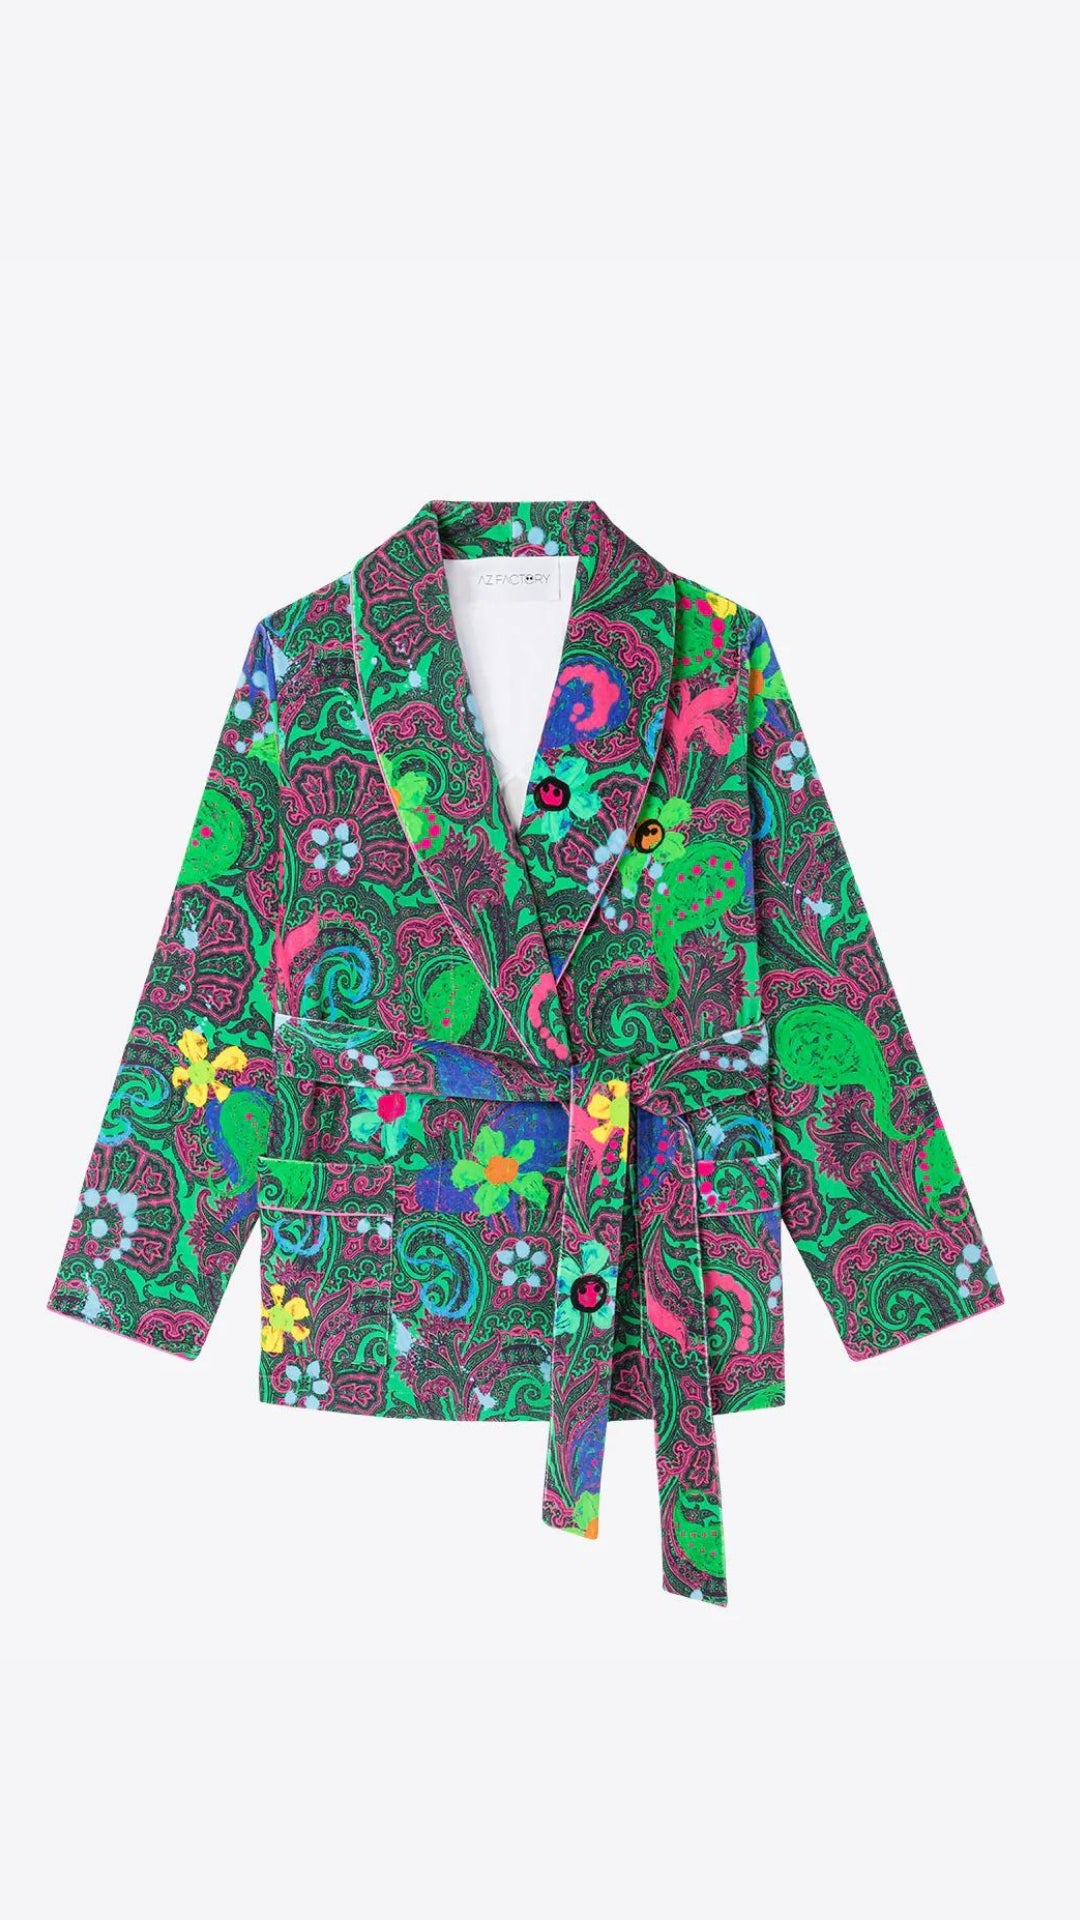 AZ Factory Shawl Collar Jacket in Motly Paisley. This lightweight, belted jacket boasts an all-over printed velvet fabric, tie belt, front patch pockets, butterfly lining, and piping details for an extra touch of elegance. Product photo shown from the front. 